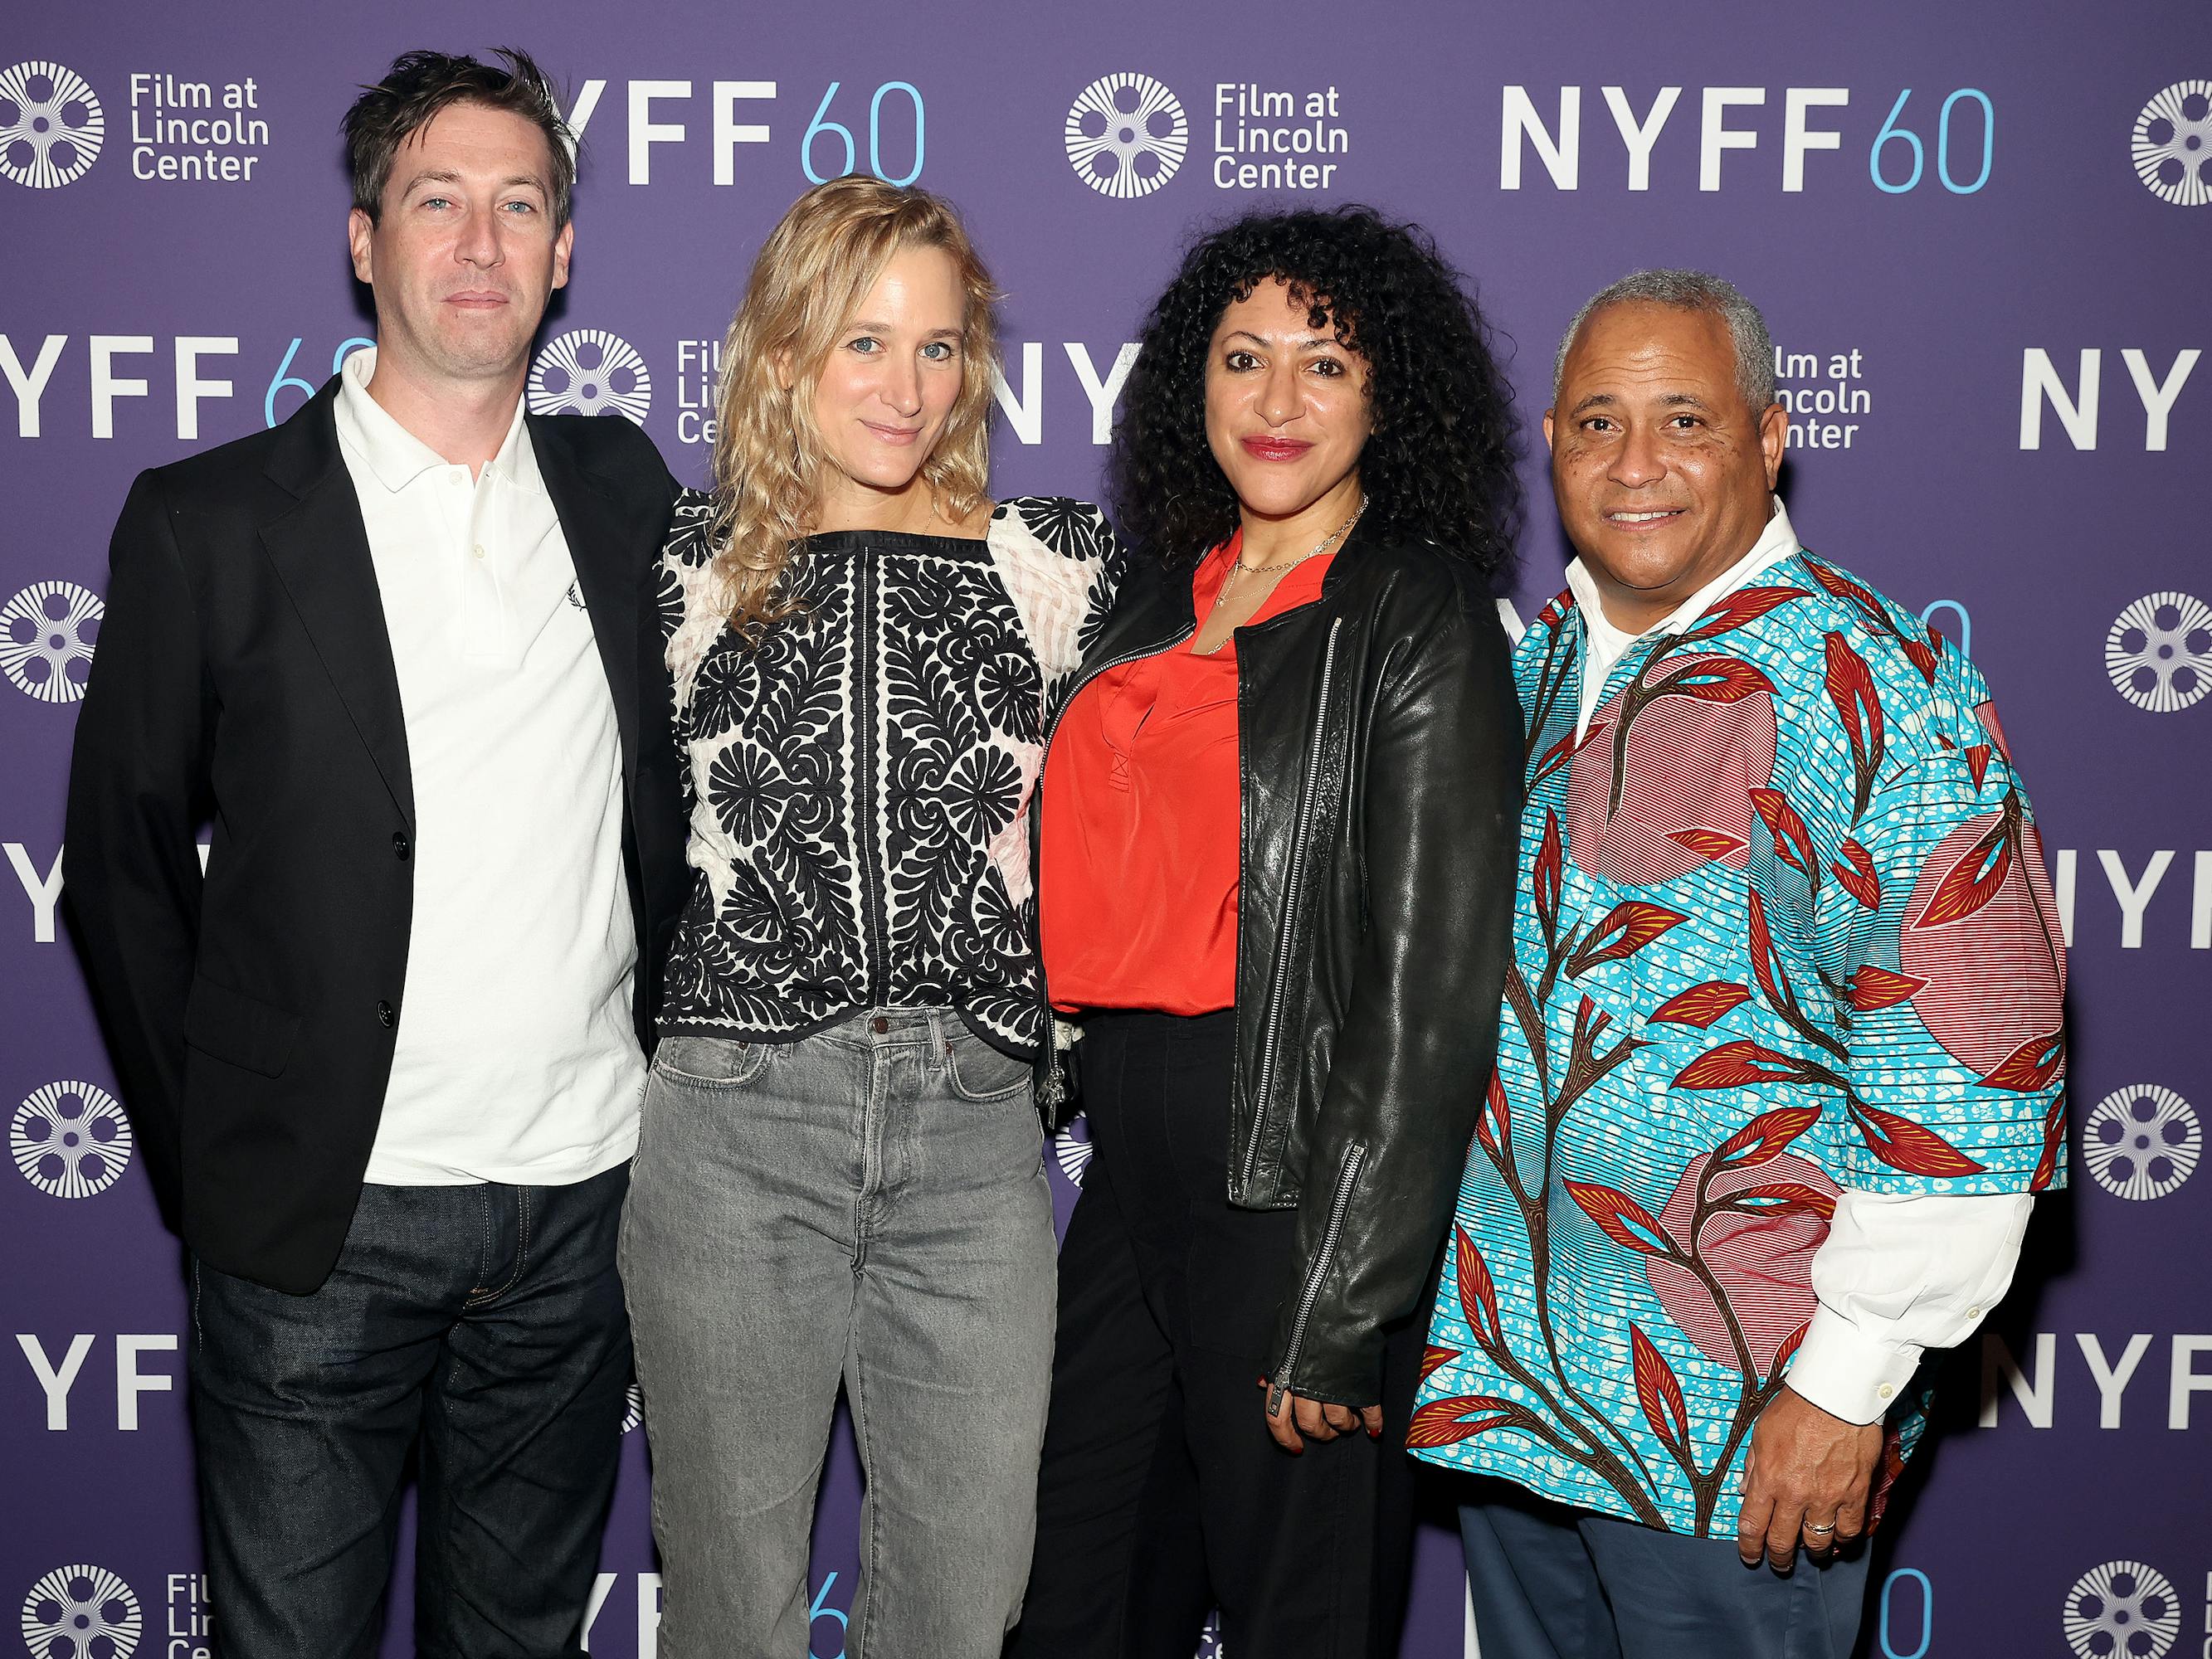 Kyle Martin, Margaret Brown, Essie Chambers, and Dr. Kern Jackson pose together against a purple NYFF step-and-repeat.